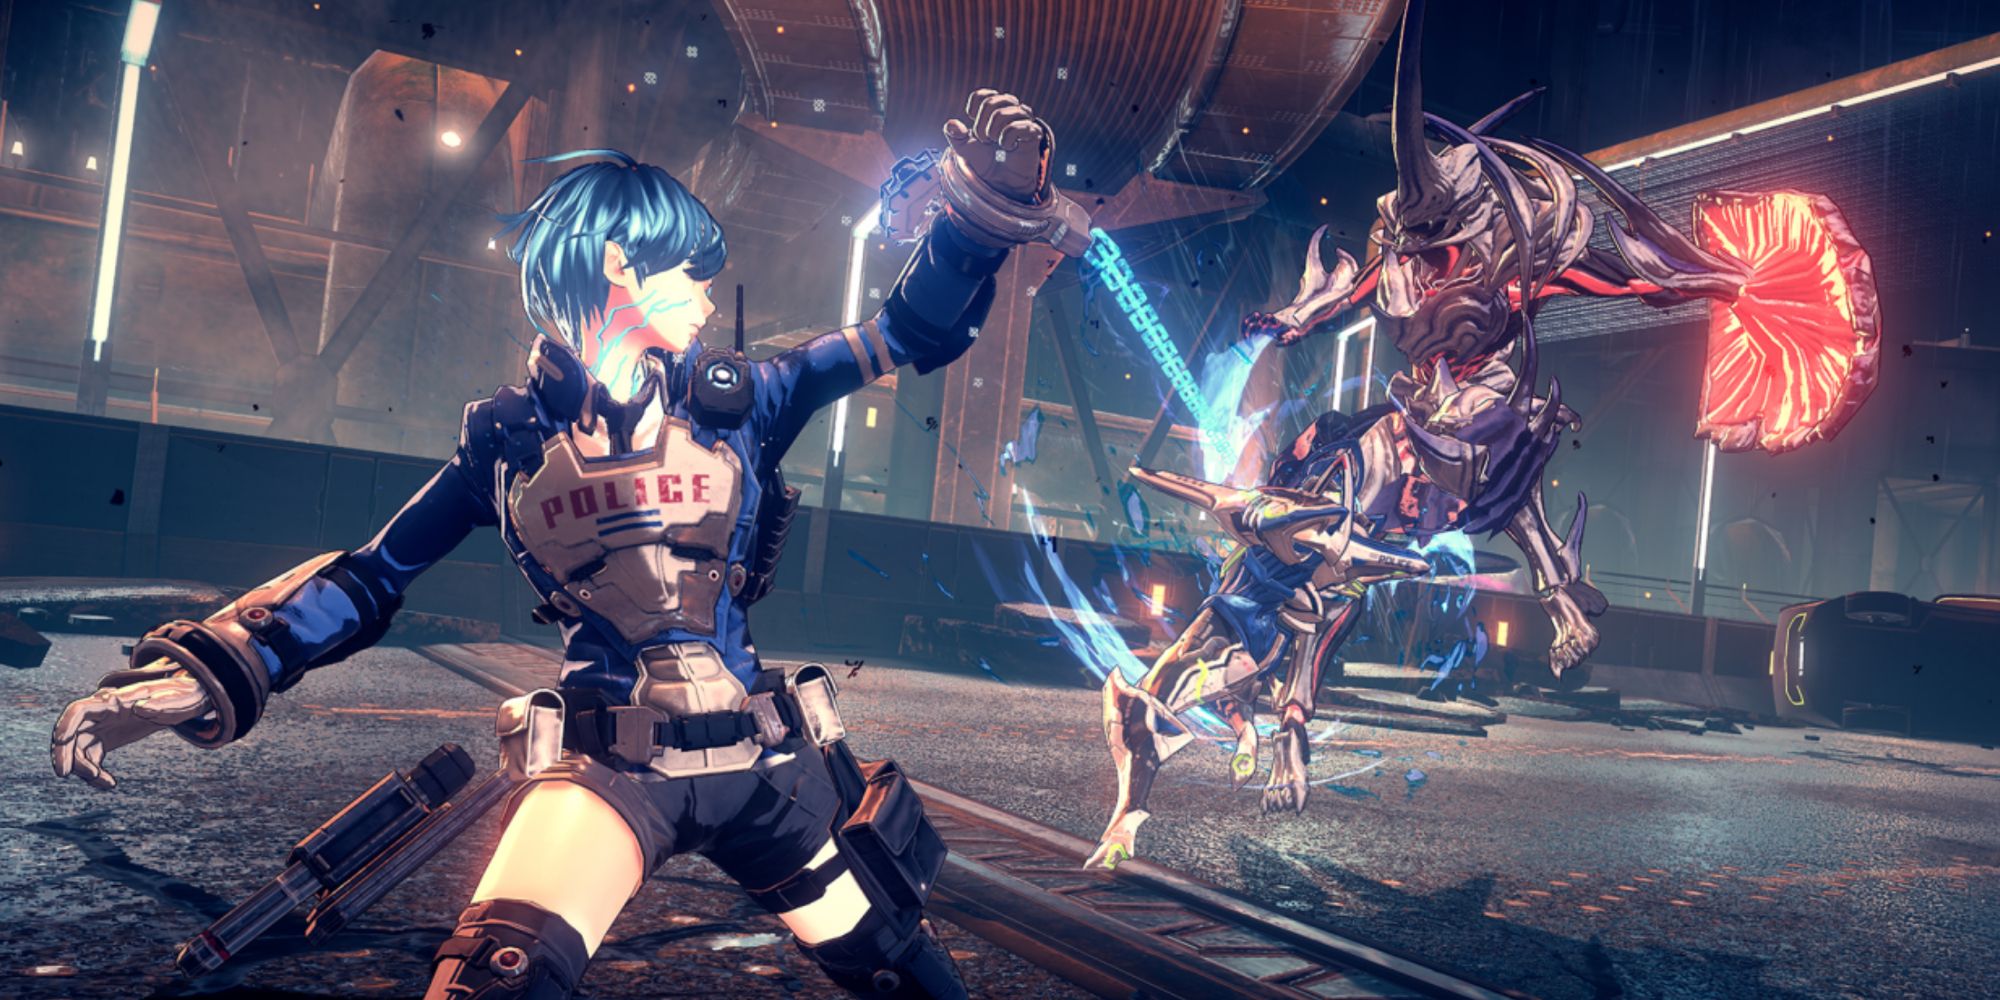 Howard using Legion in Astral Chain combat